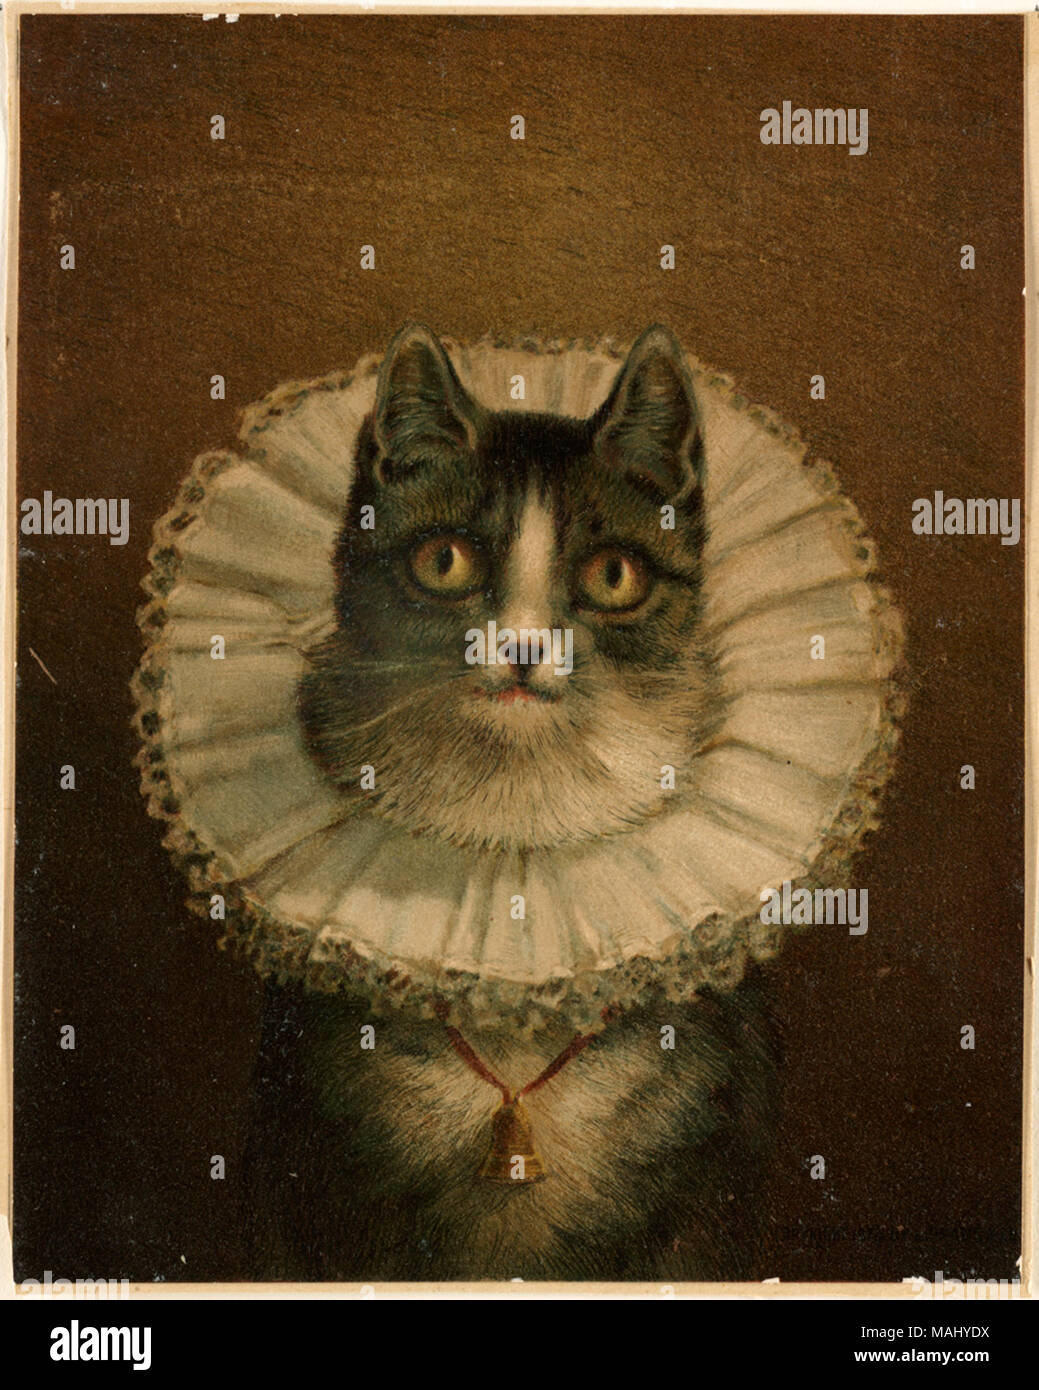 .  English: Shows cat wearing Elizabethan/17-century lace ruff collar. File name: 07 11 000711 Title: The Widow Date issued: 1861-1897 (approximate) Physical description note: Genre: Chromolithographs Location: Boston Public Library,    on 2011-08-07: Camera: Sinar AG Sinarback 54 FW, Sinar m       . 1861-1897 (approximate date of lithograph); Flickr loaded: 2008-07-23 15:08:40 Stock Photo